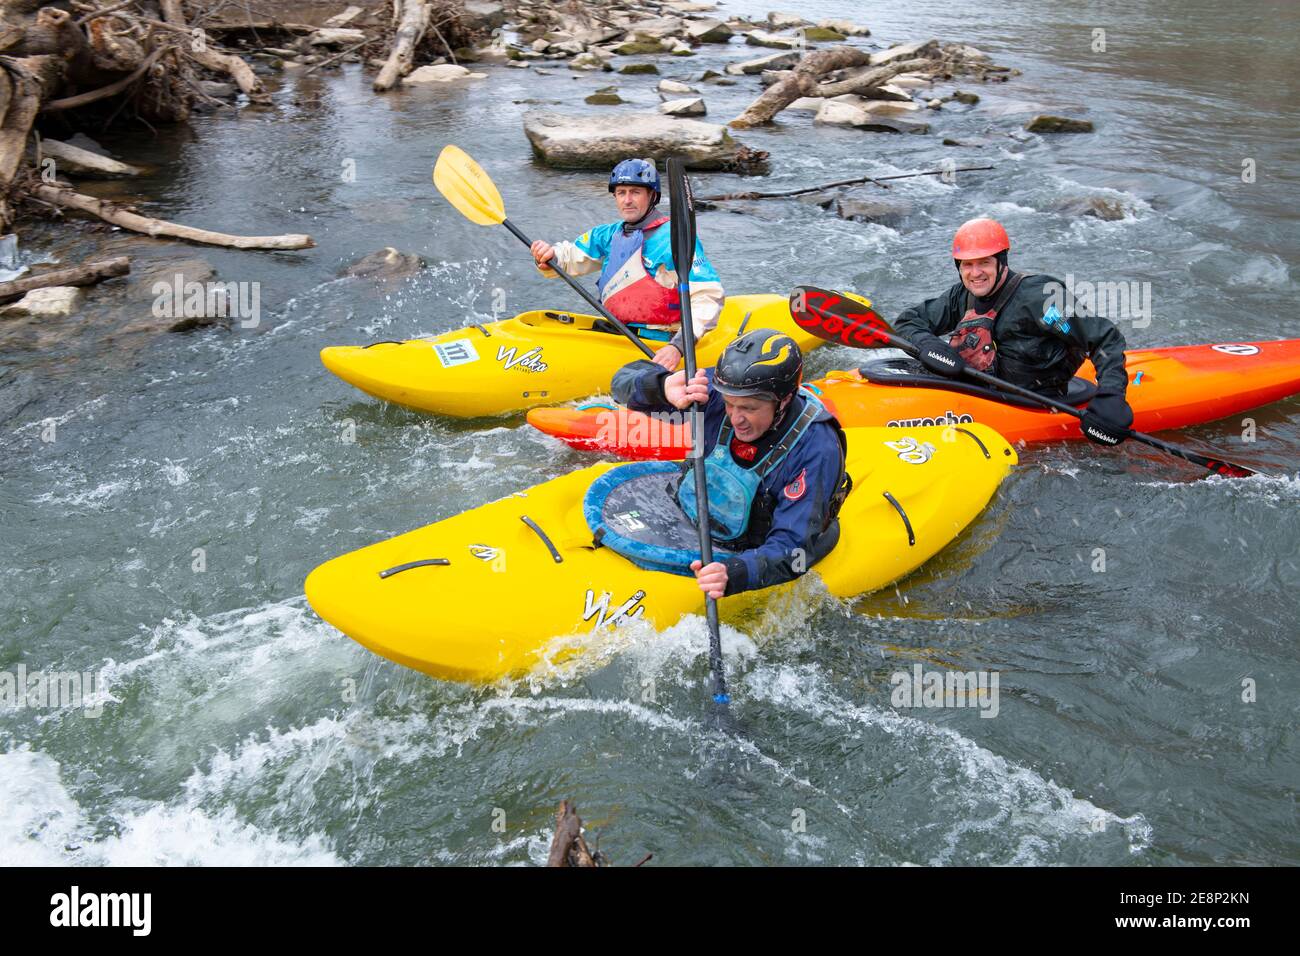 USA Maryland MD kayak sul fiume Potomac vicino a Darnstown uomini divertimento invernale Foto Stock